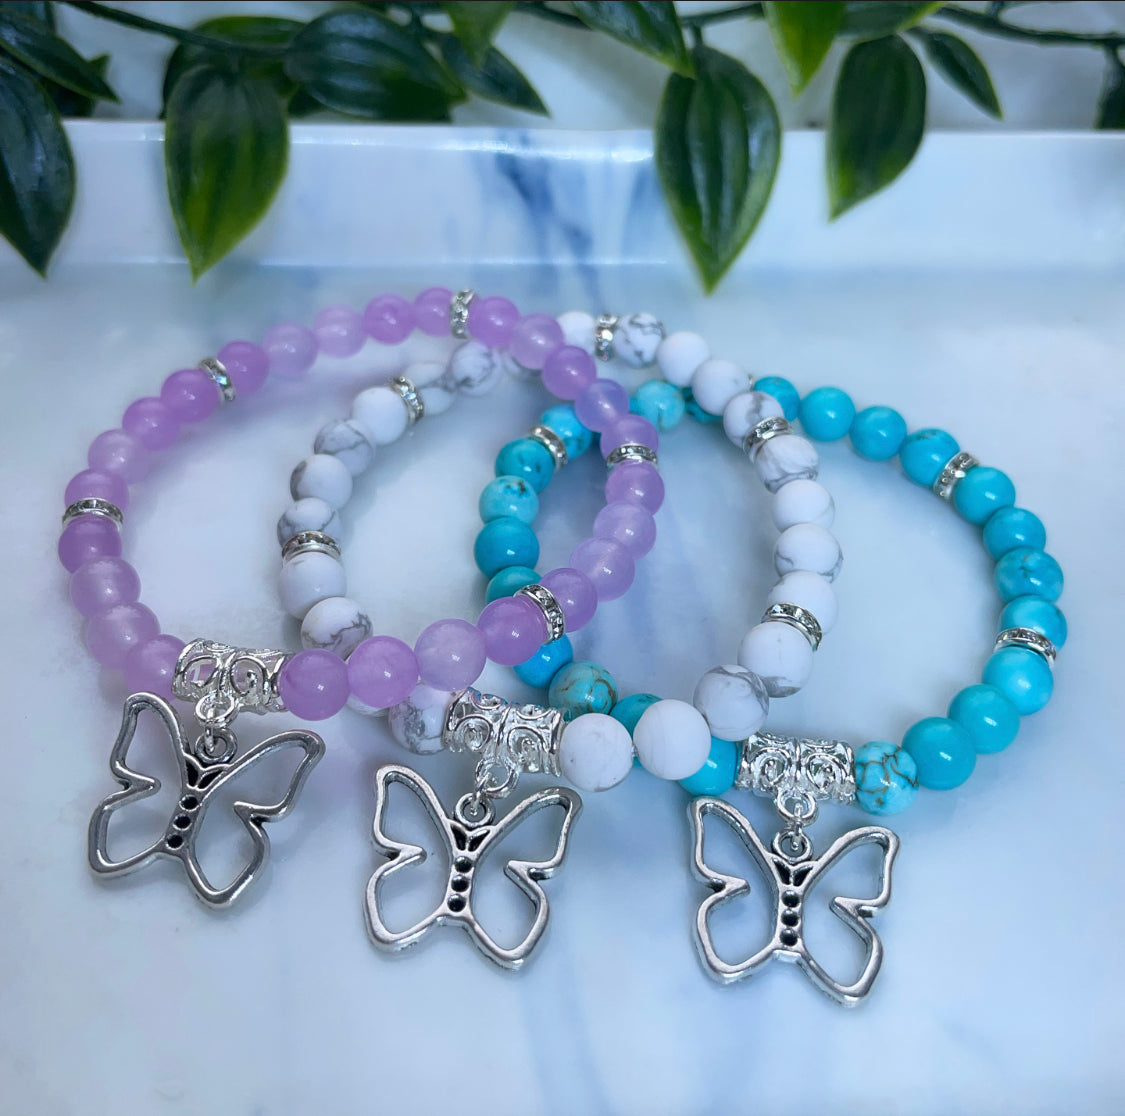 Crystal butterfly charm bracelets lilac jade, howlite and turquoise